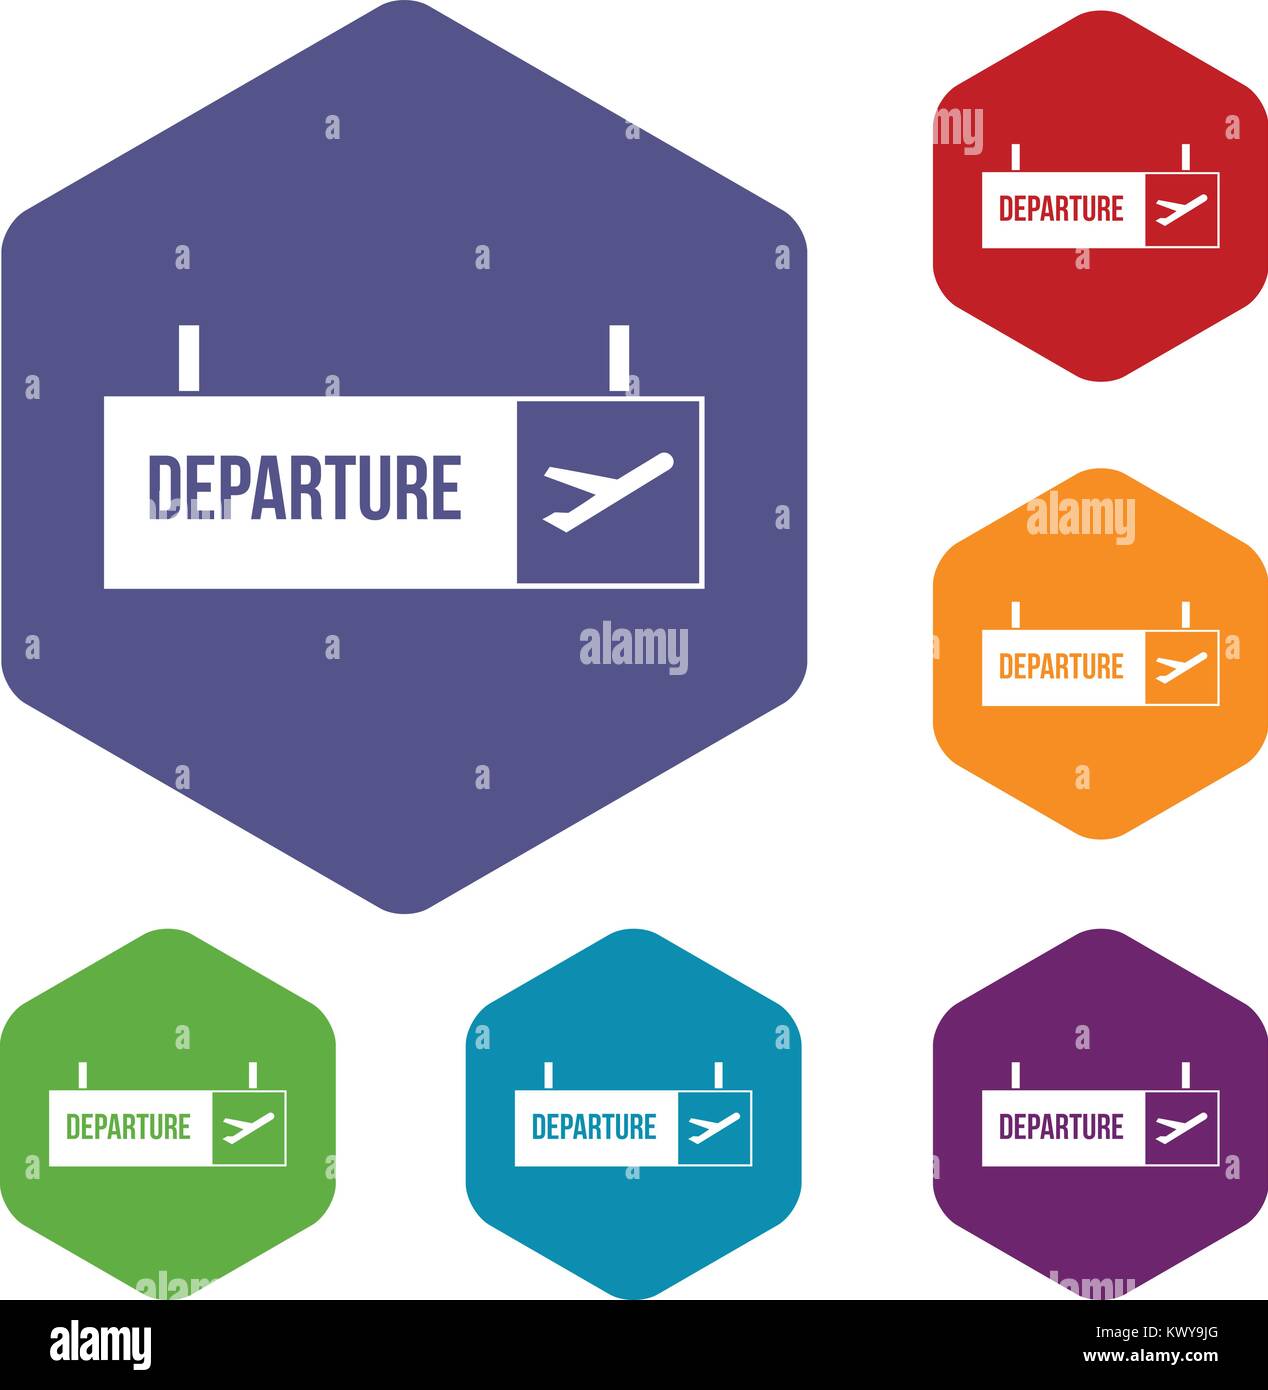 Airport departure sign icons set Stock Vector